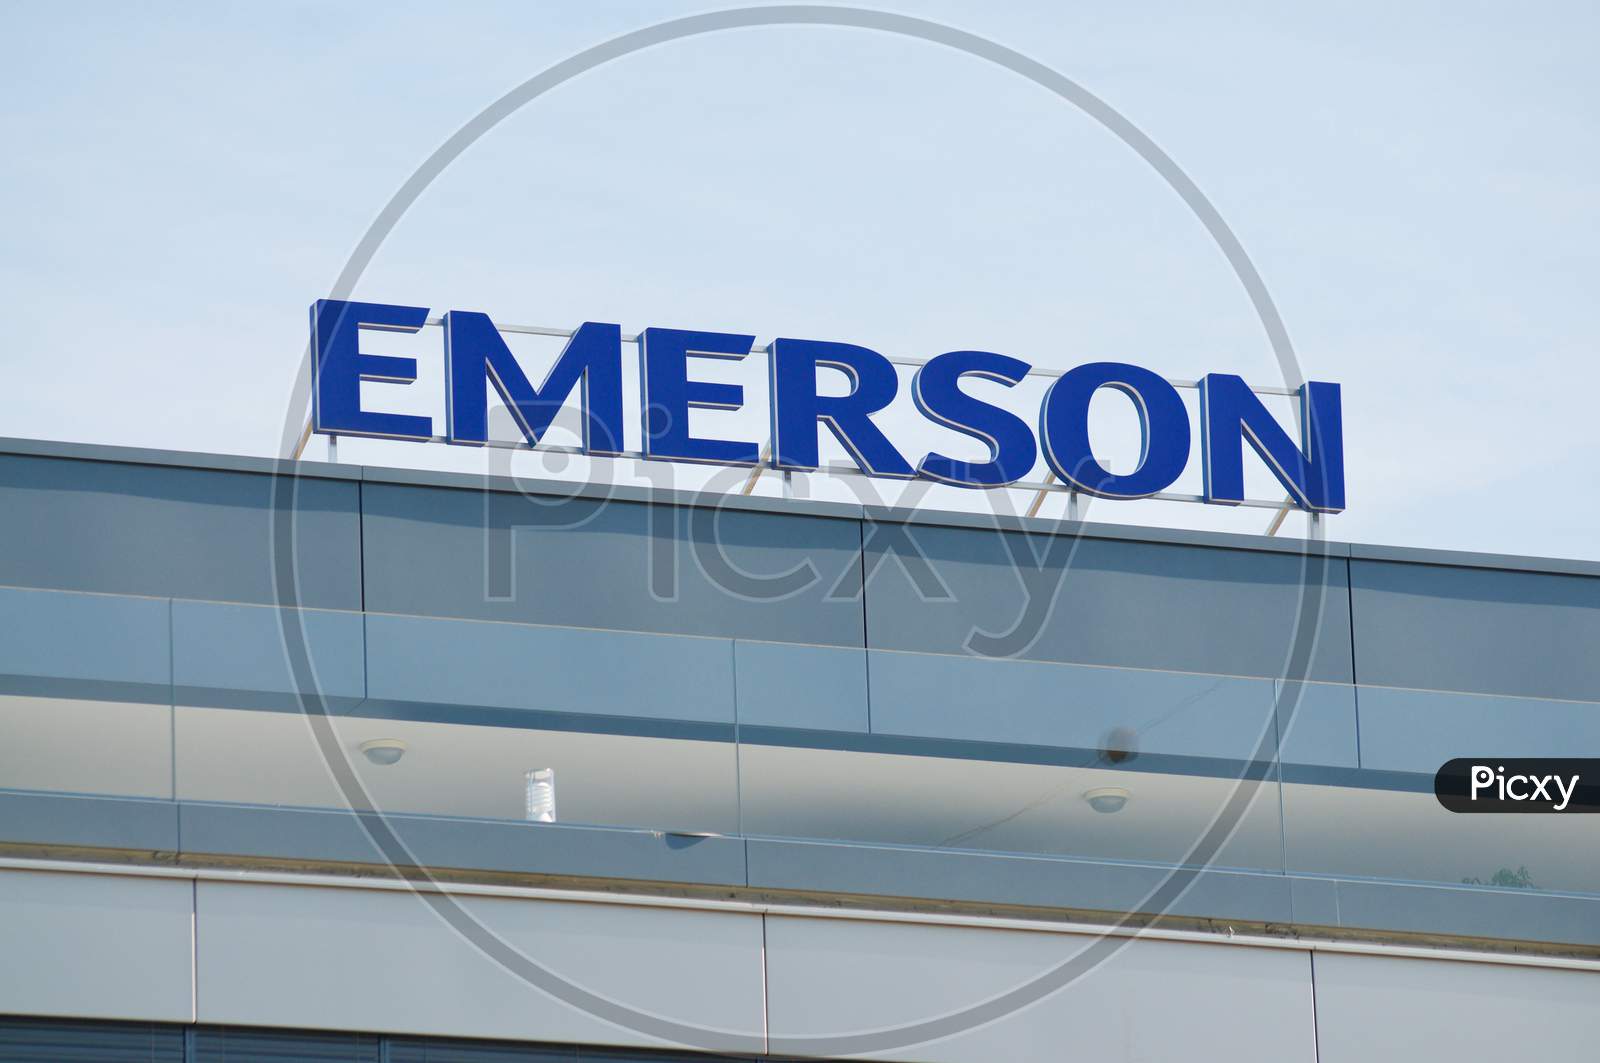 Emerson Electric Co. Sign At Office Building In Baar, Switzerland